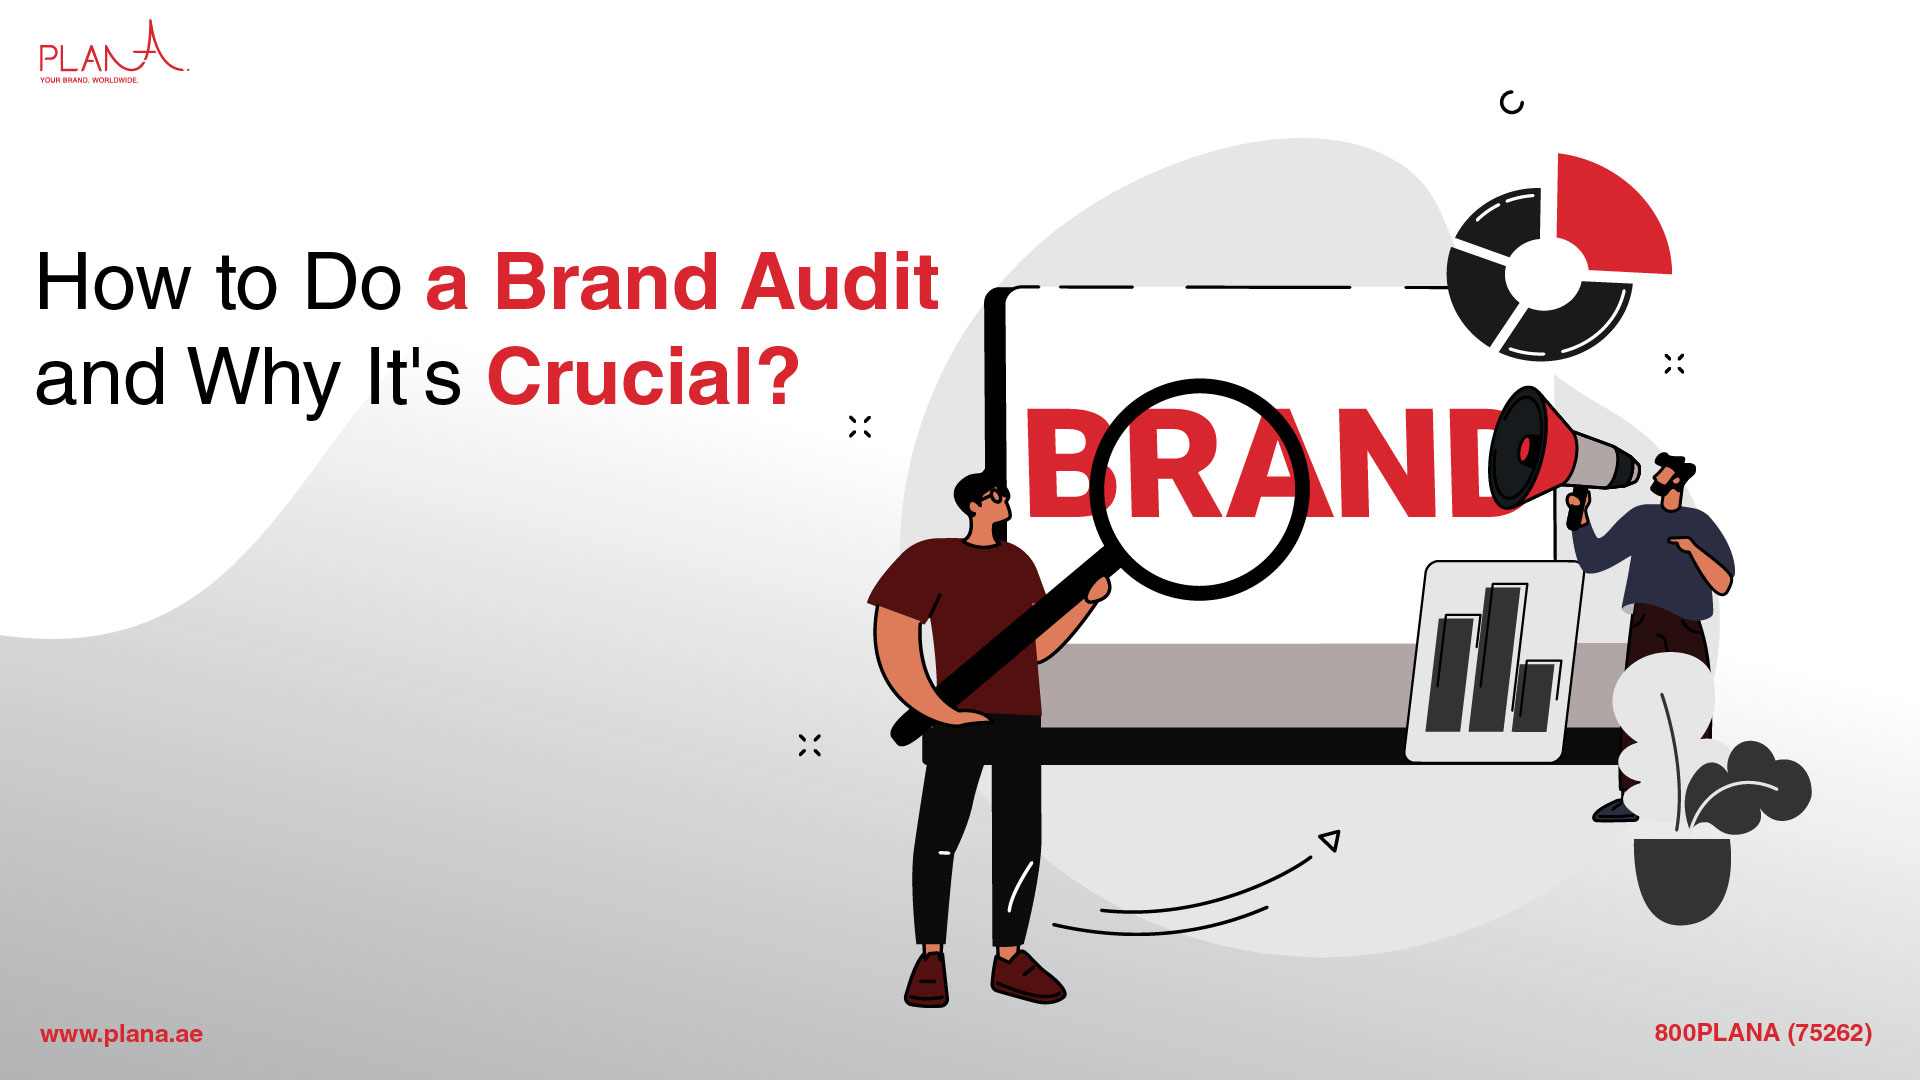 How to Do a Brand Audit and Why It's Crucial?